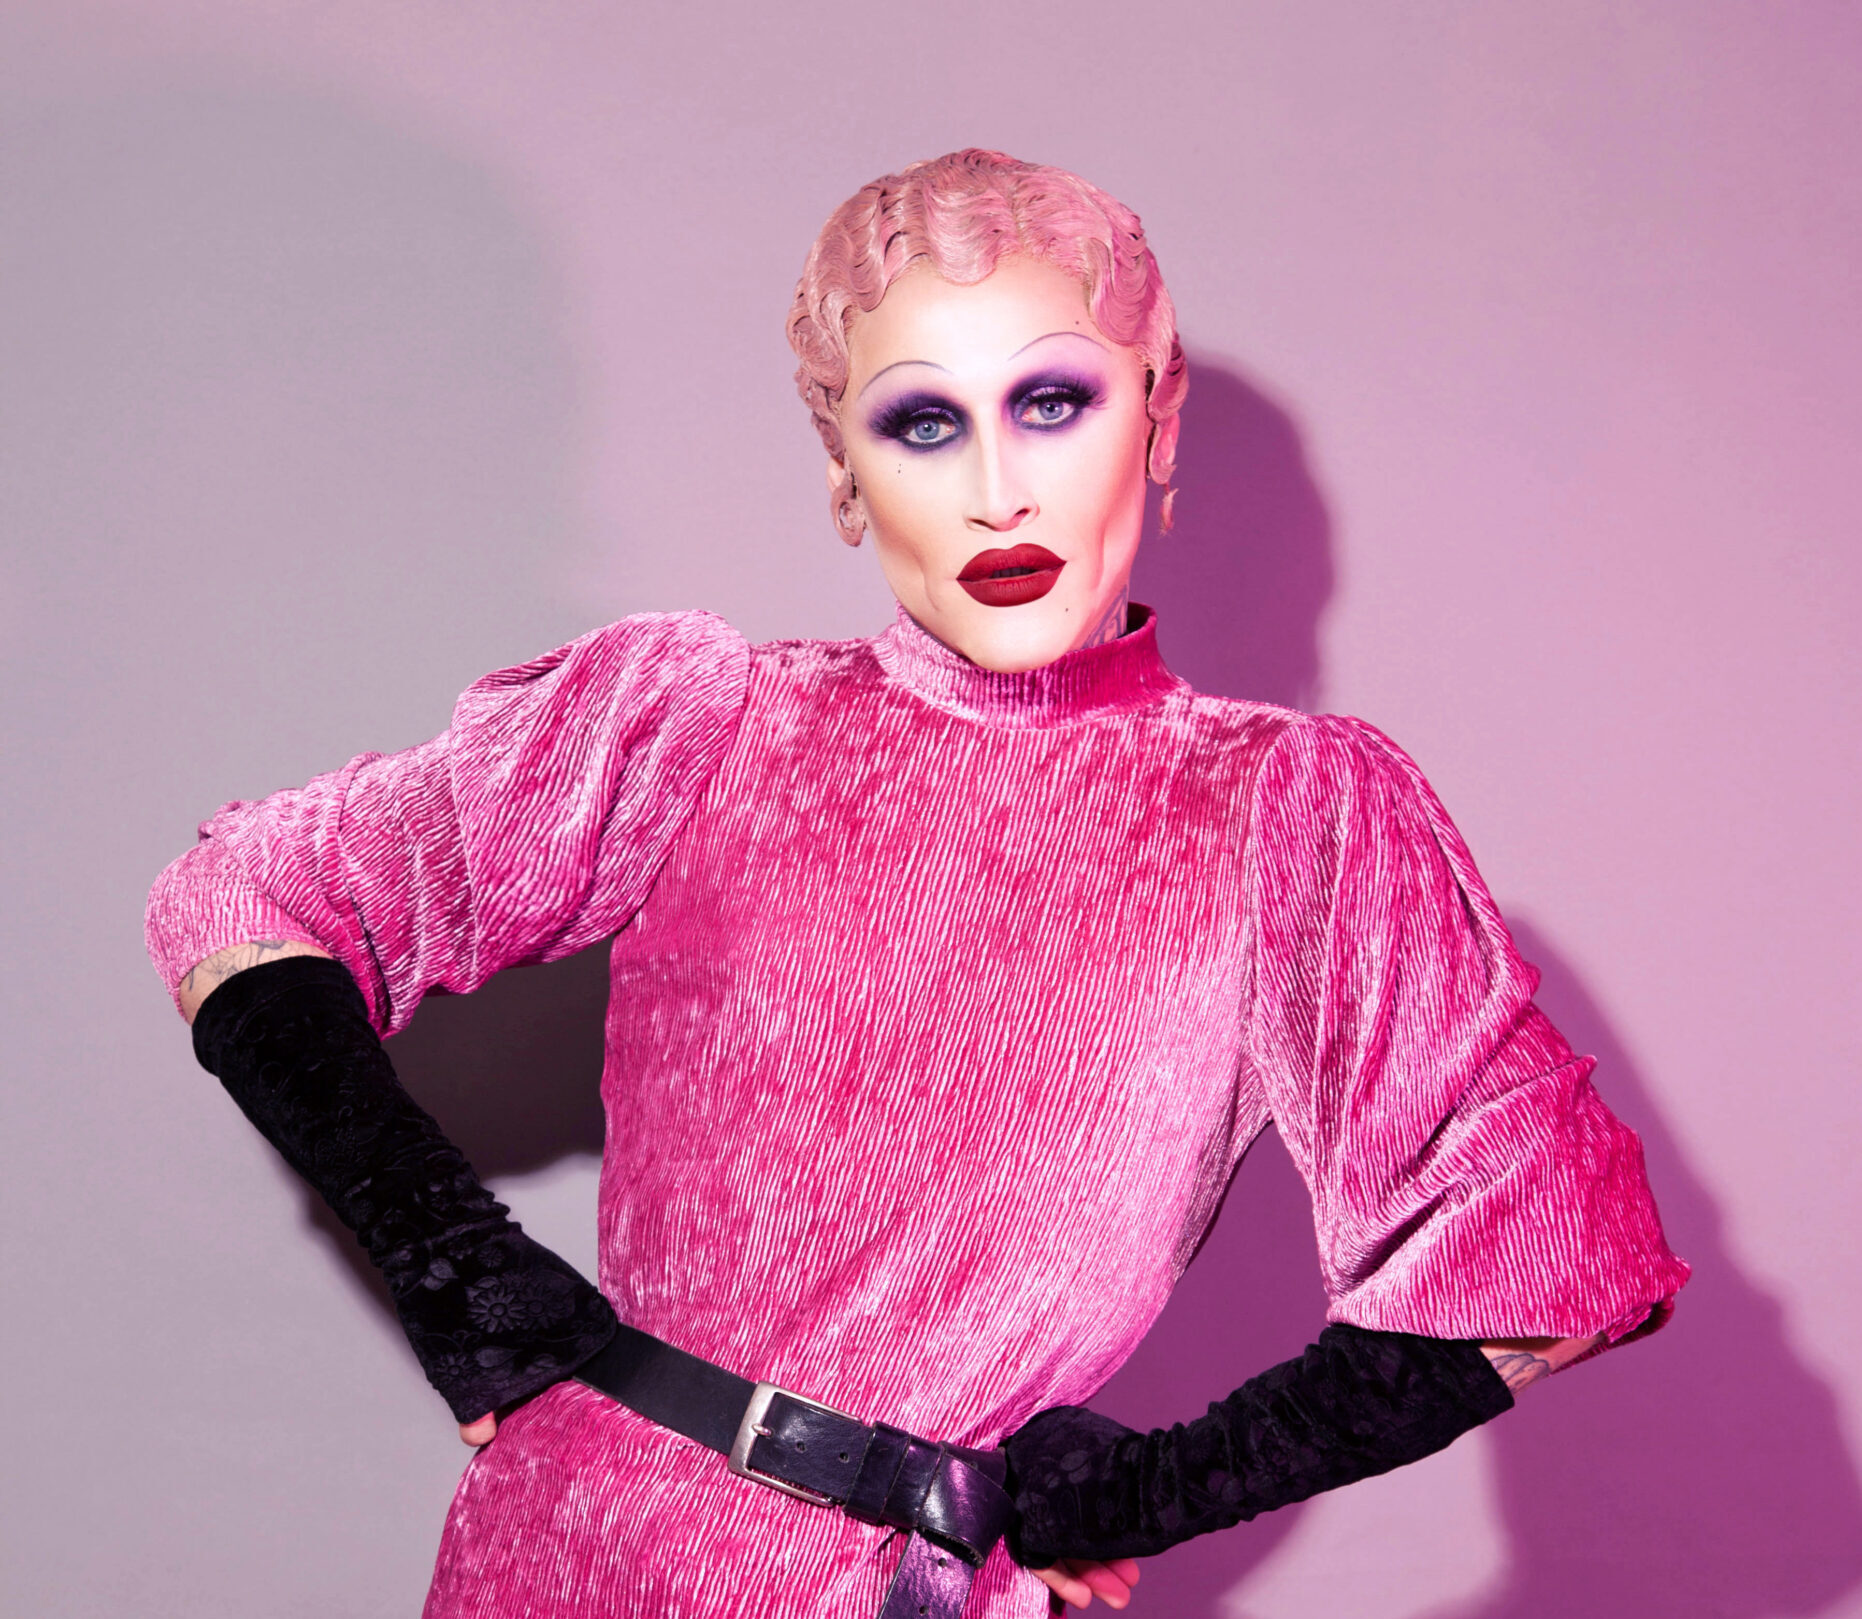 Mister Joe Black, pictured in this promotional photo wearing the infamous pink H&M dress from Ru Paul's Drag Race UK. Joe is also wearing black gloves and is stood against a photo backdrop.